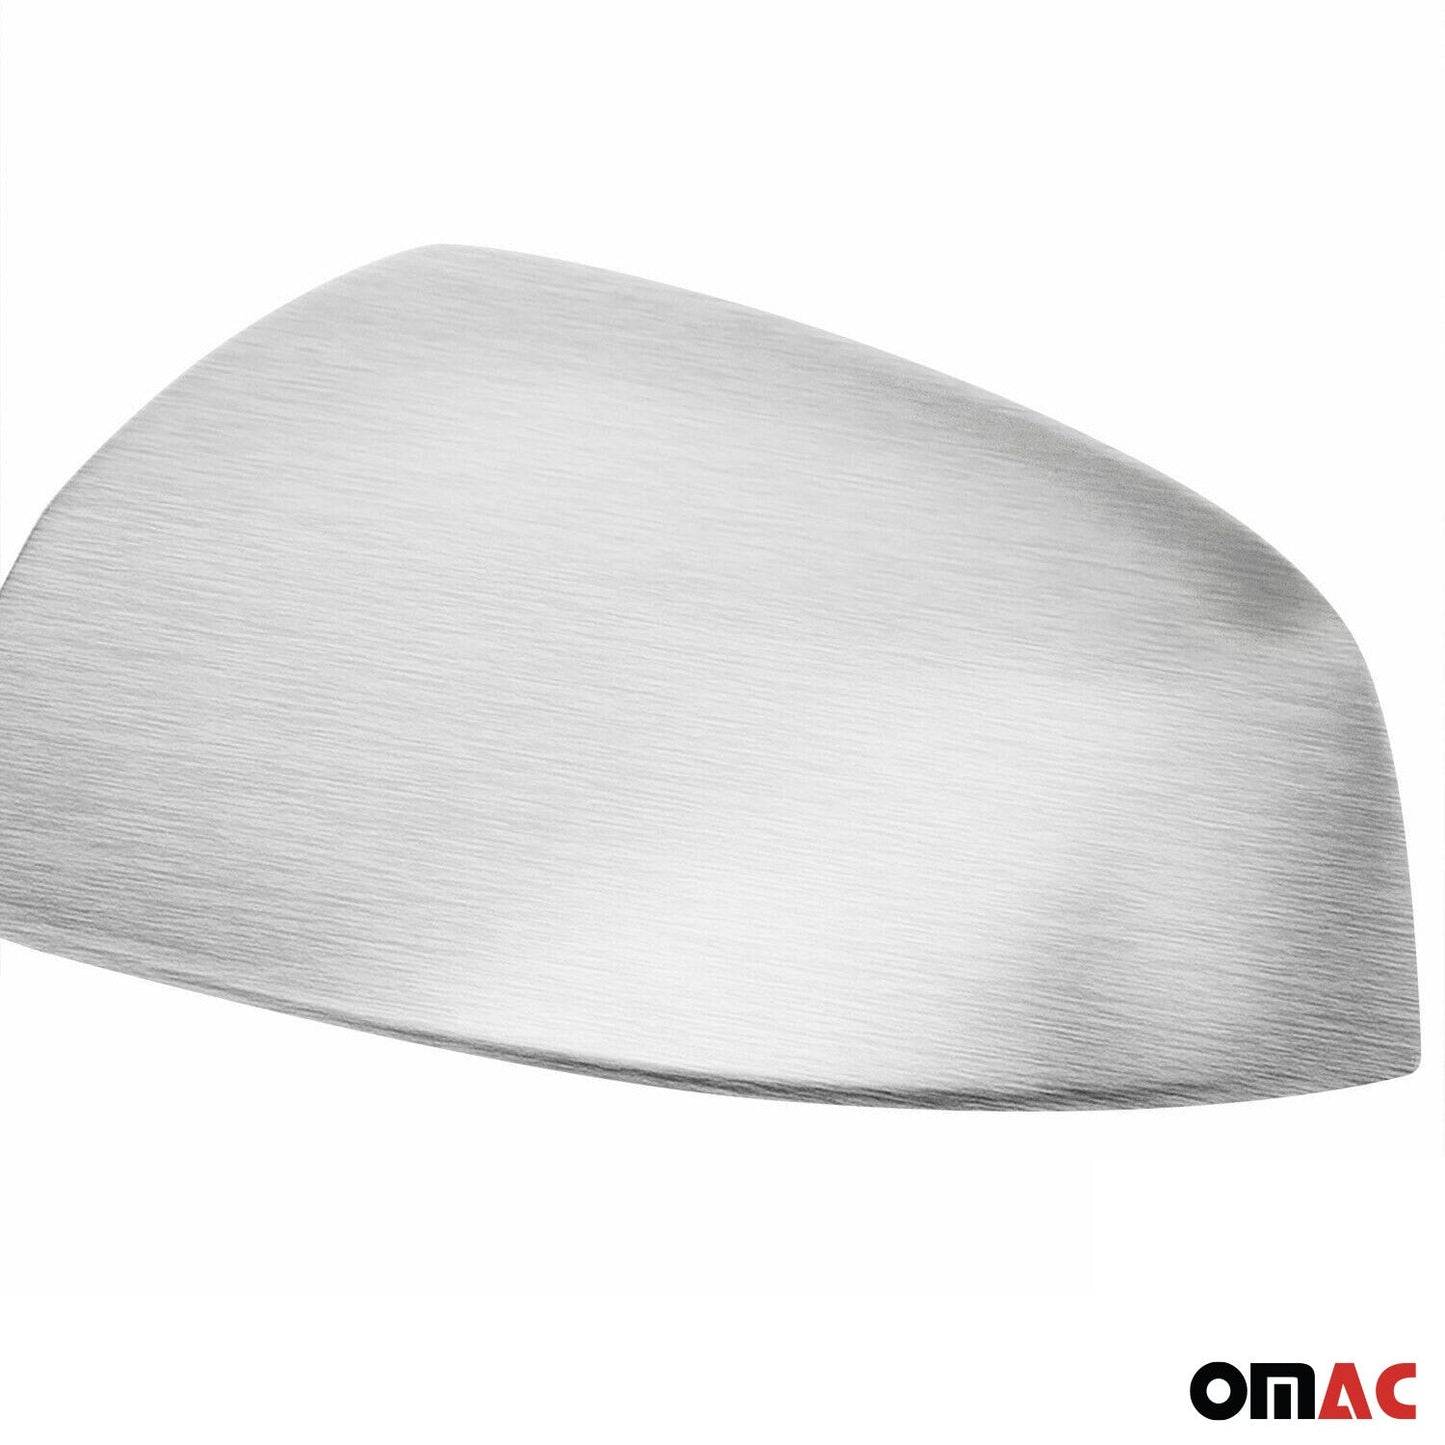 OMAC Side Mirror Cover Caps Fits Smart ForTwo 2007-2015 Brushed Steel Silver 2 Pcs 4751111T